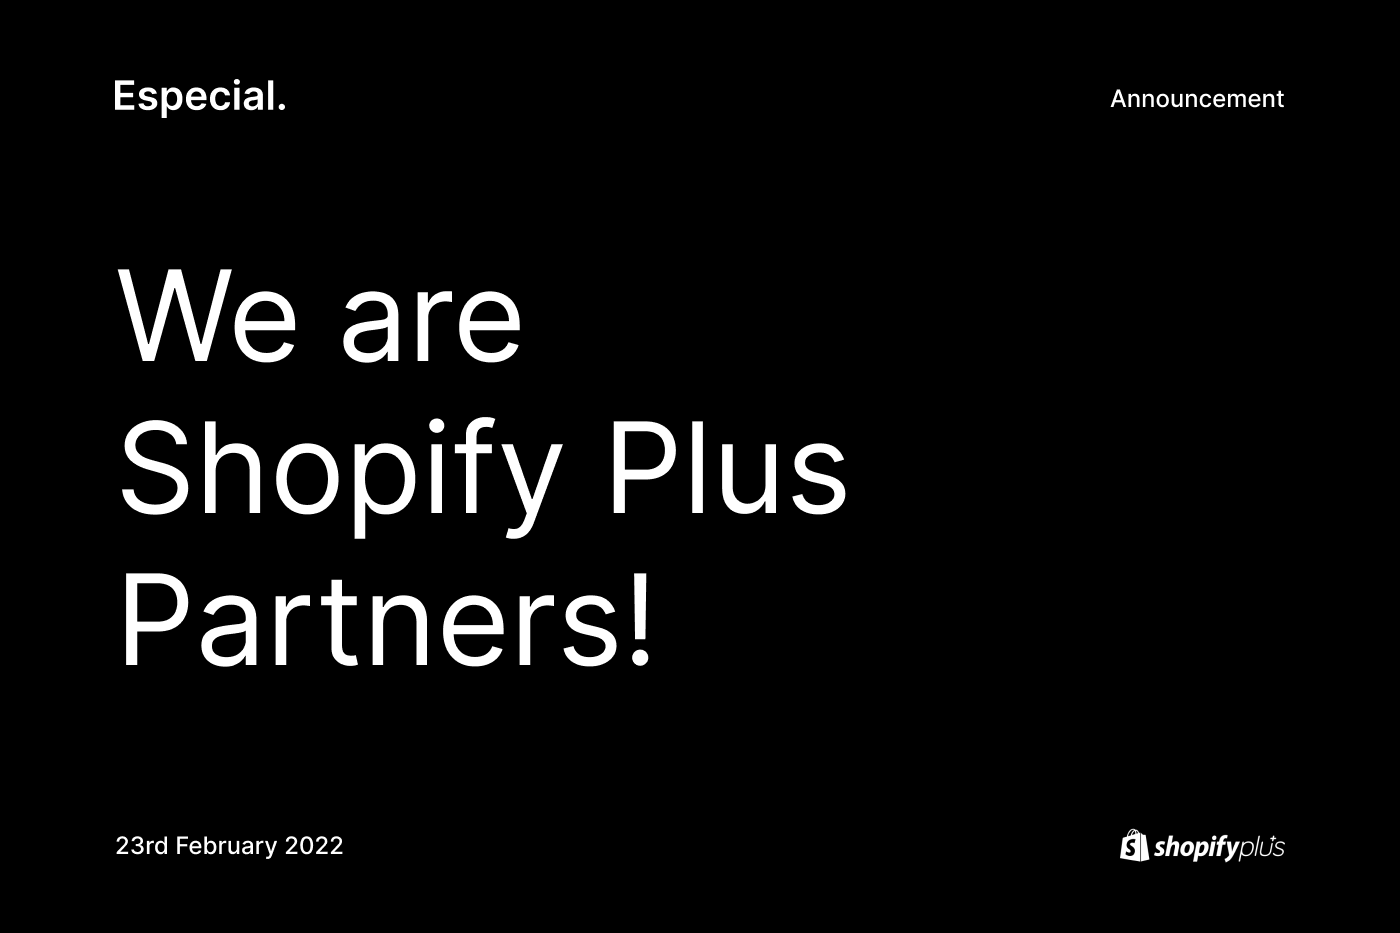 especial is now a Shopify Plus certified partner announcement 